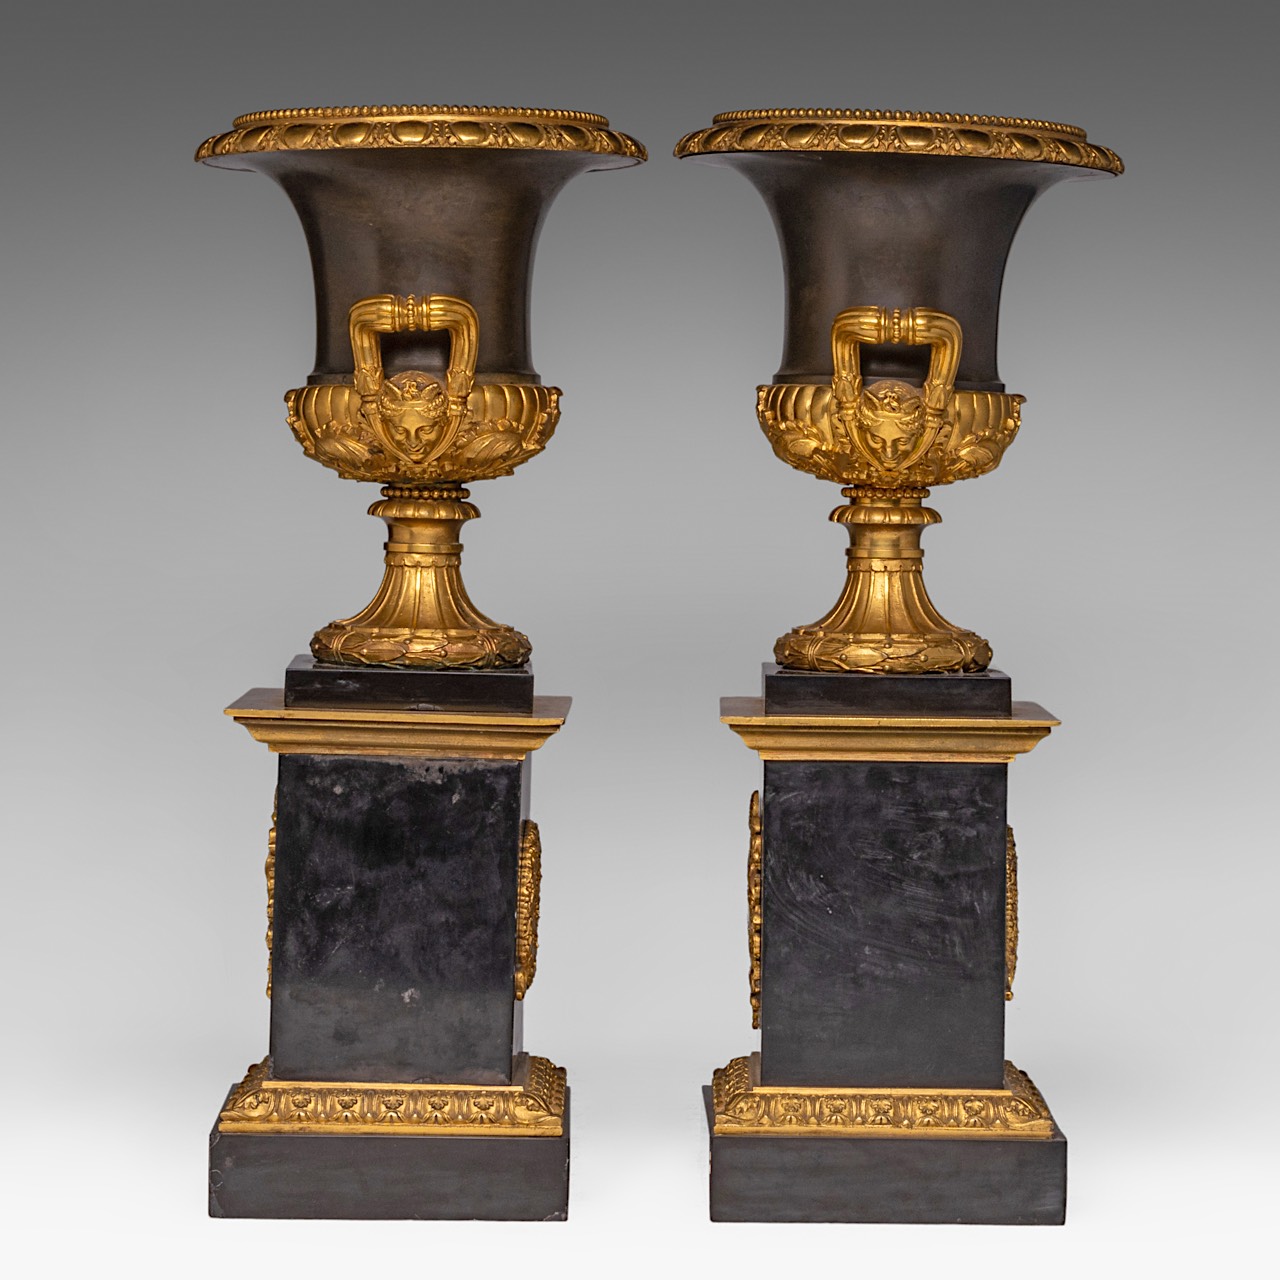 A fine pair of Neoclassical patinated and gilt bronze and black marble Medici type vases, H 45 cm - Image 2 of 5